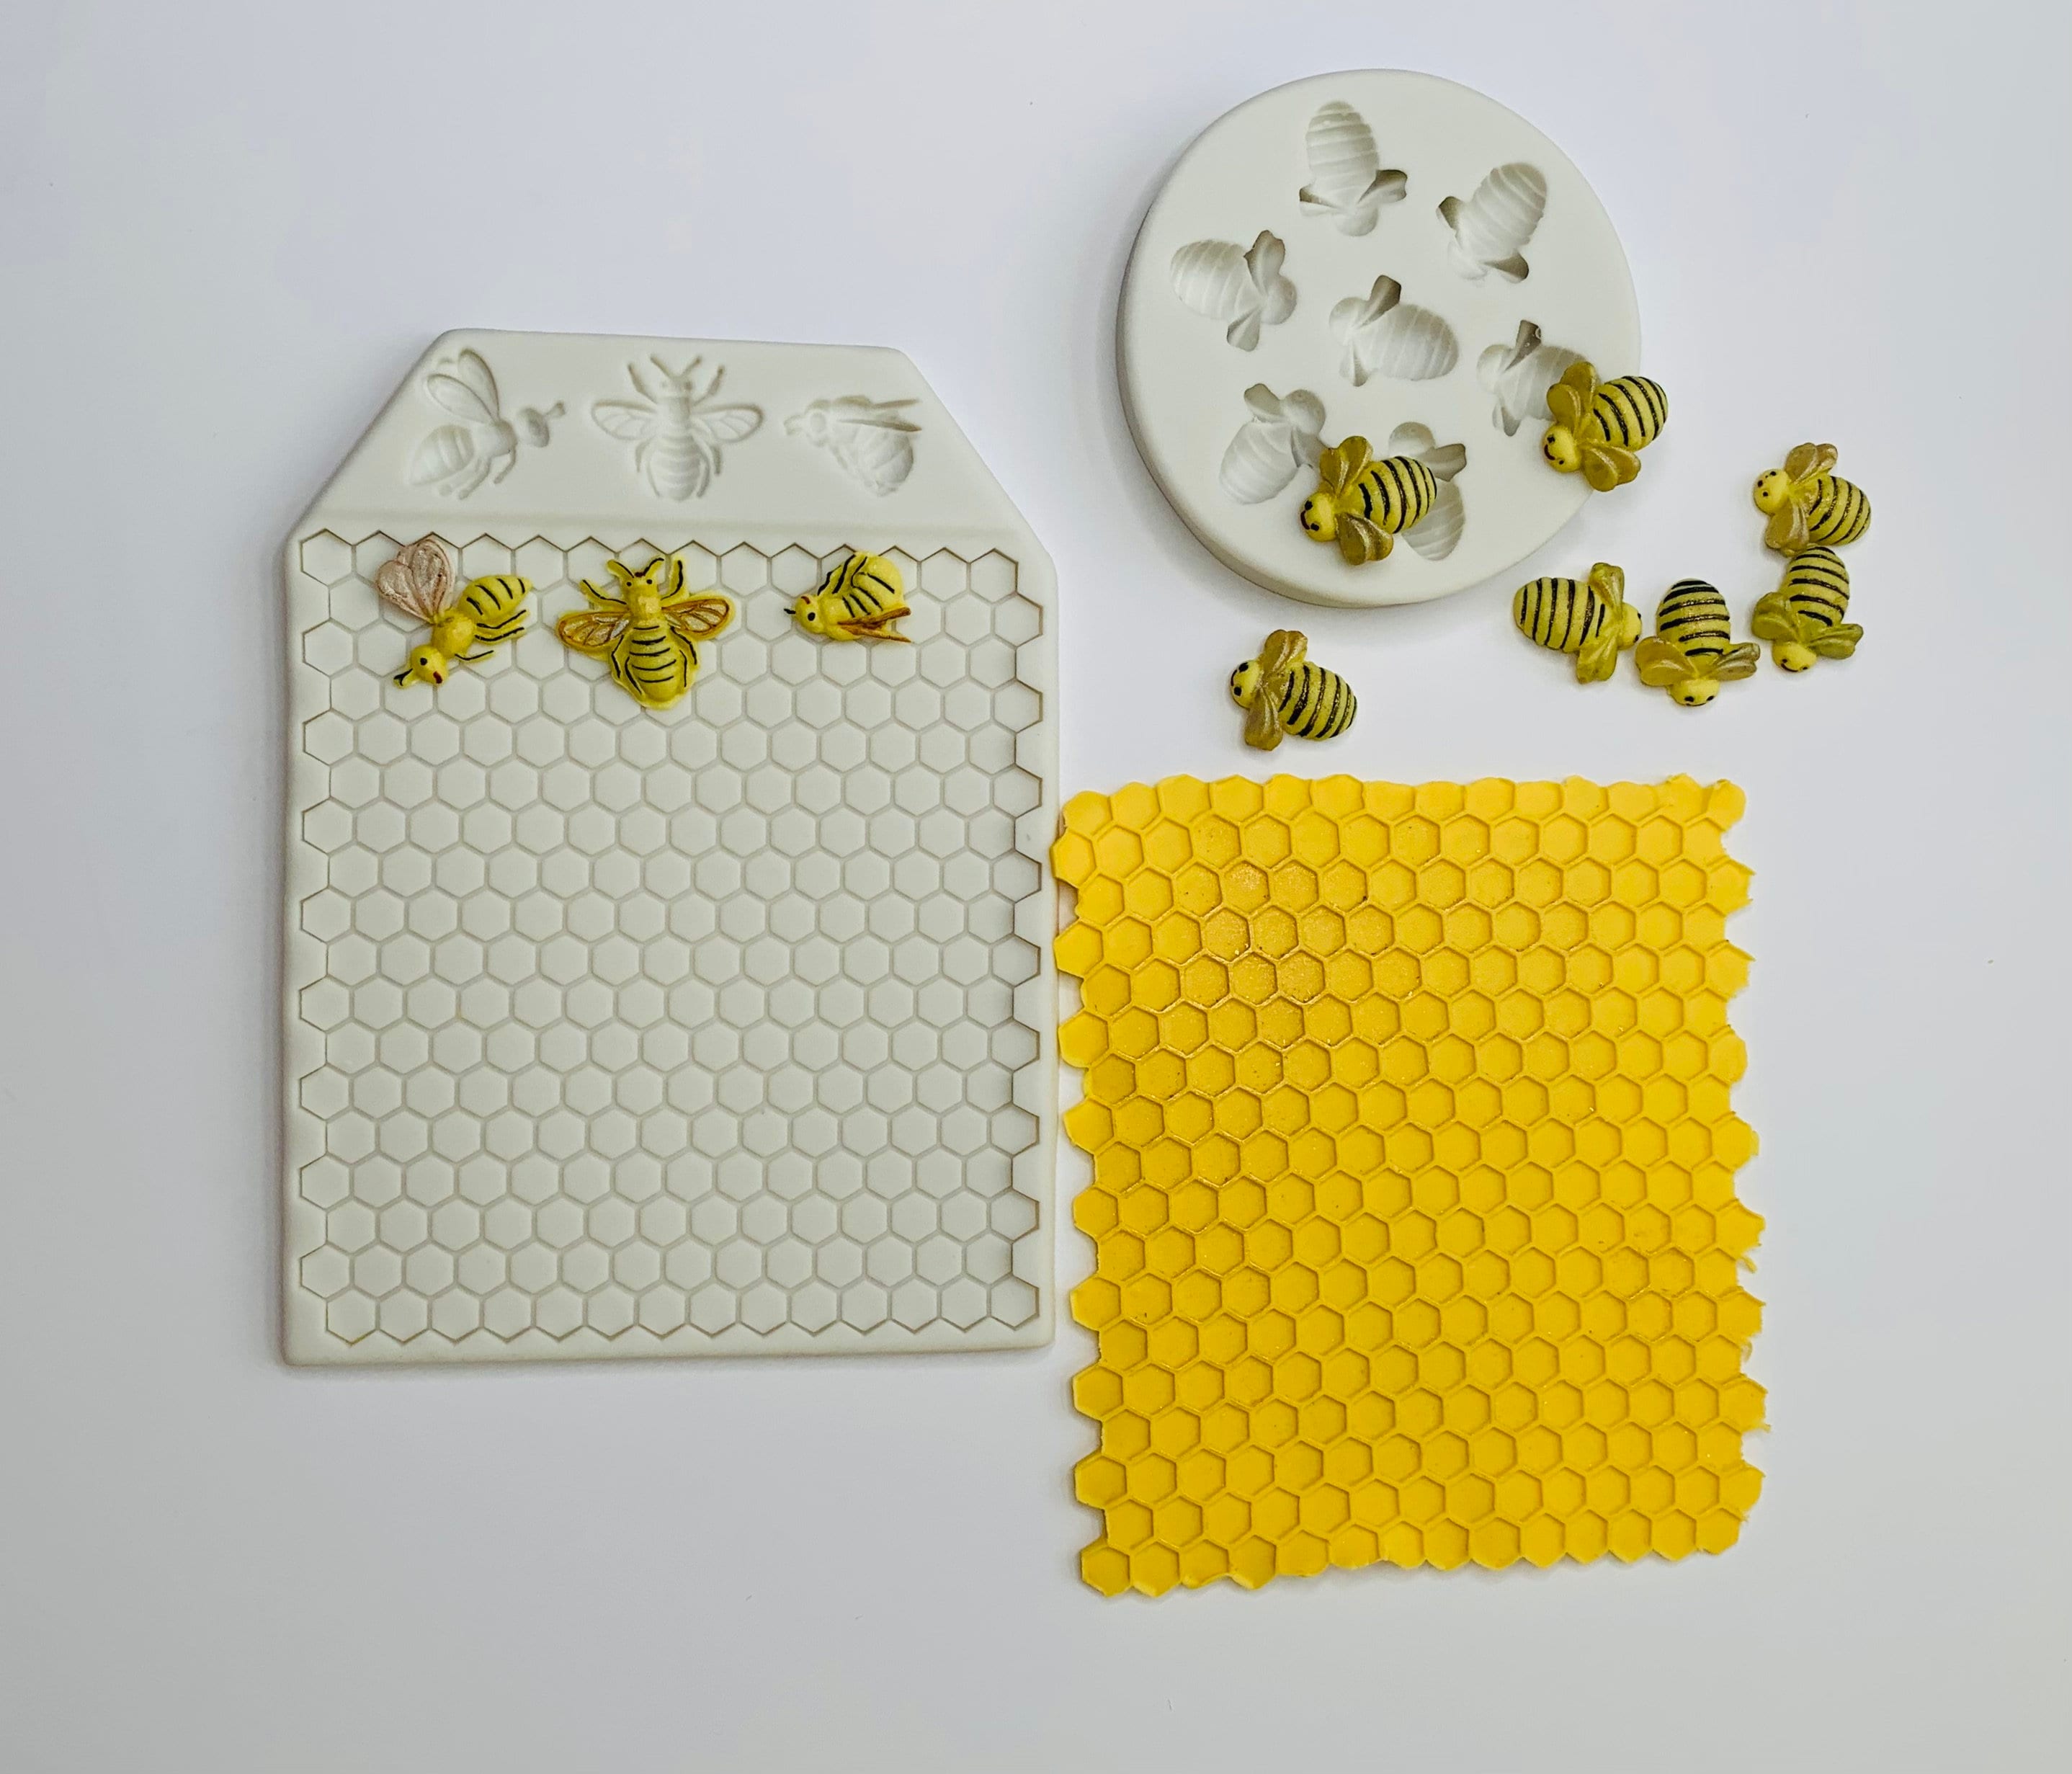 IKOJINg honeycomb silicone molds, beehive fondant press pad, chocolate  candy cake decorating silicone mold imprint mat